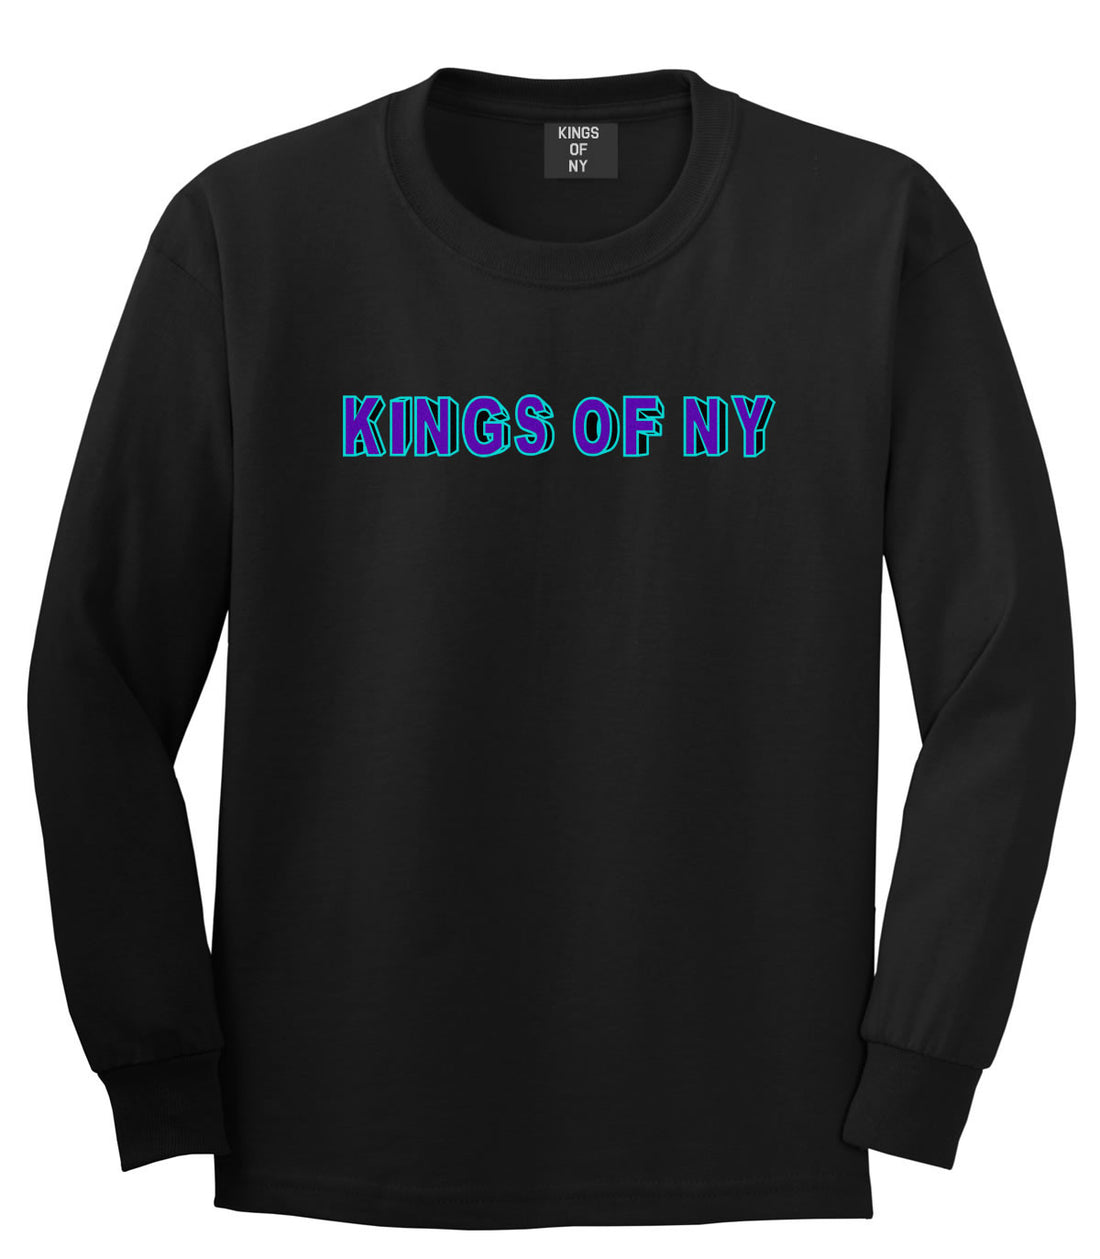 Bright Block Letters Long Sleeve T-Shirt in Black by Kings Of NY